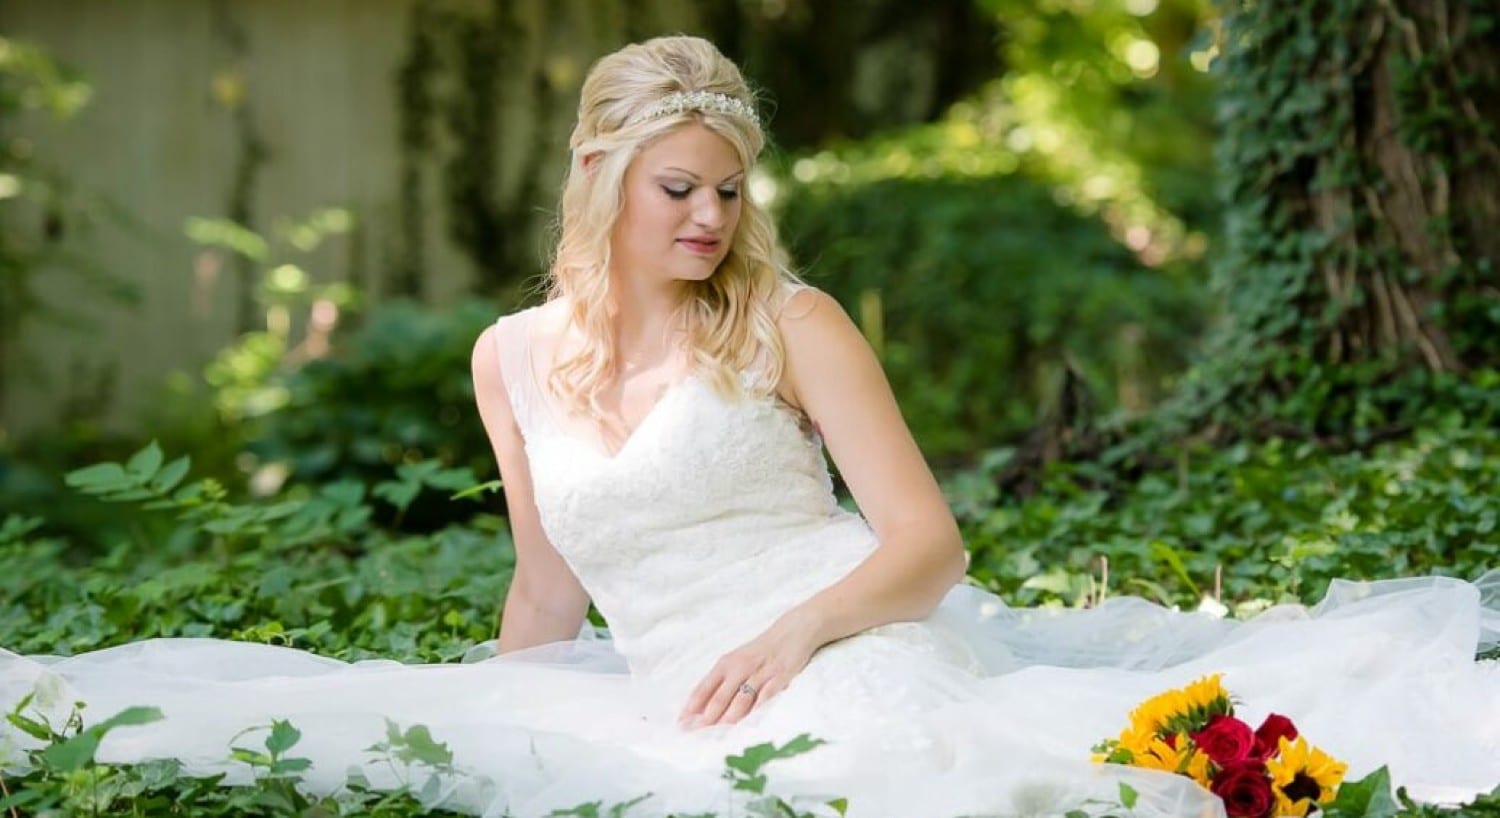 A bride in white with a red and yellow bouquet sitting at the base of three surrounded by green leaves